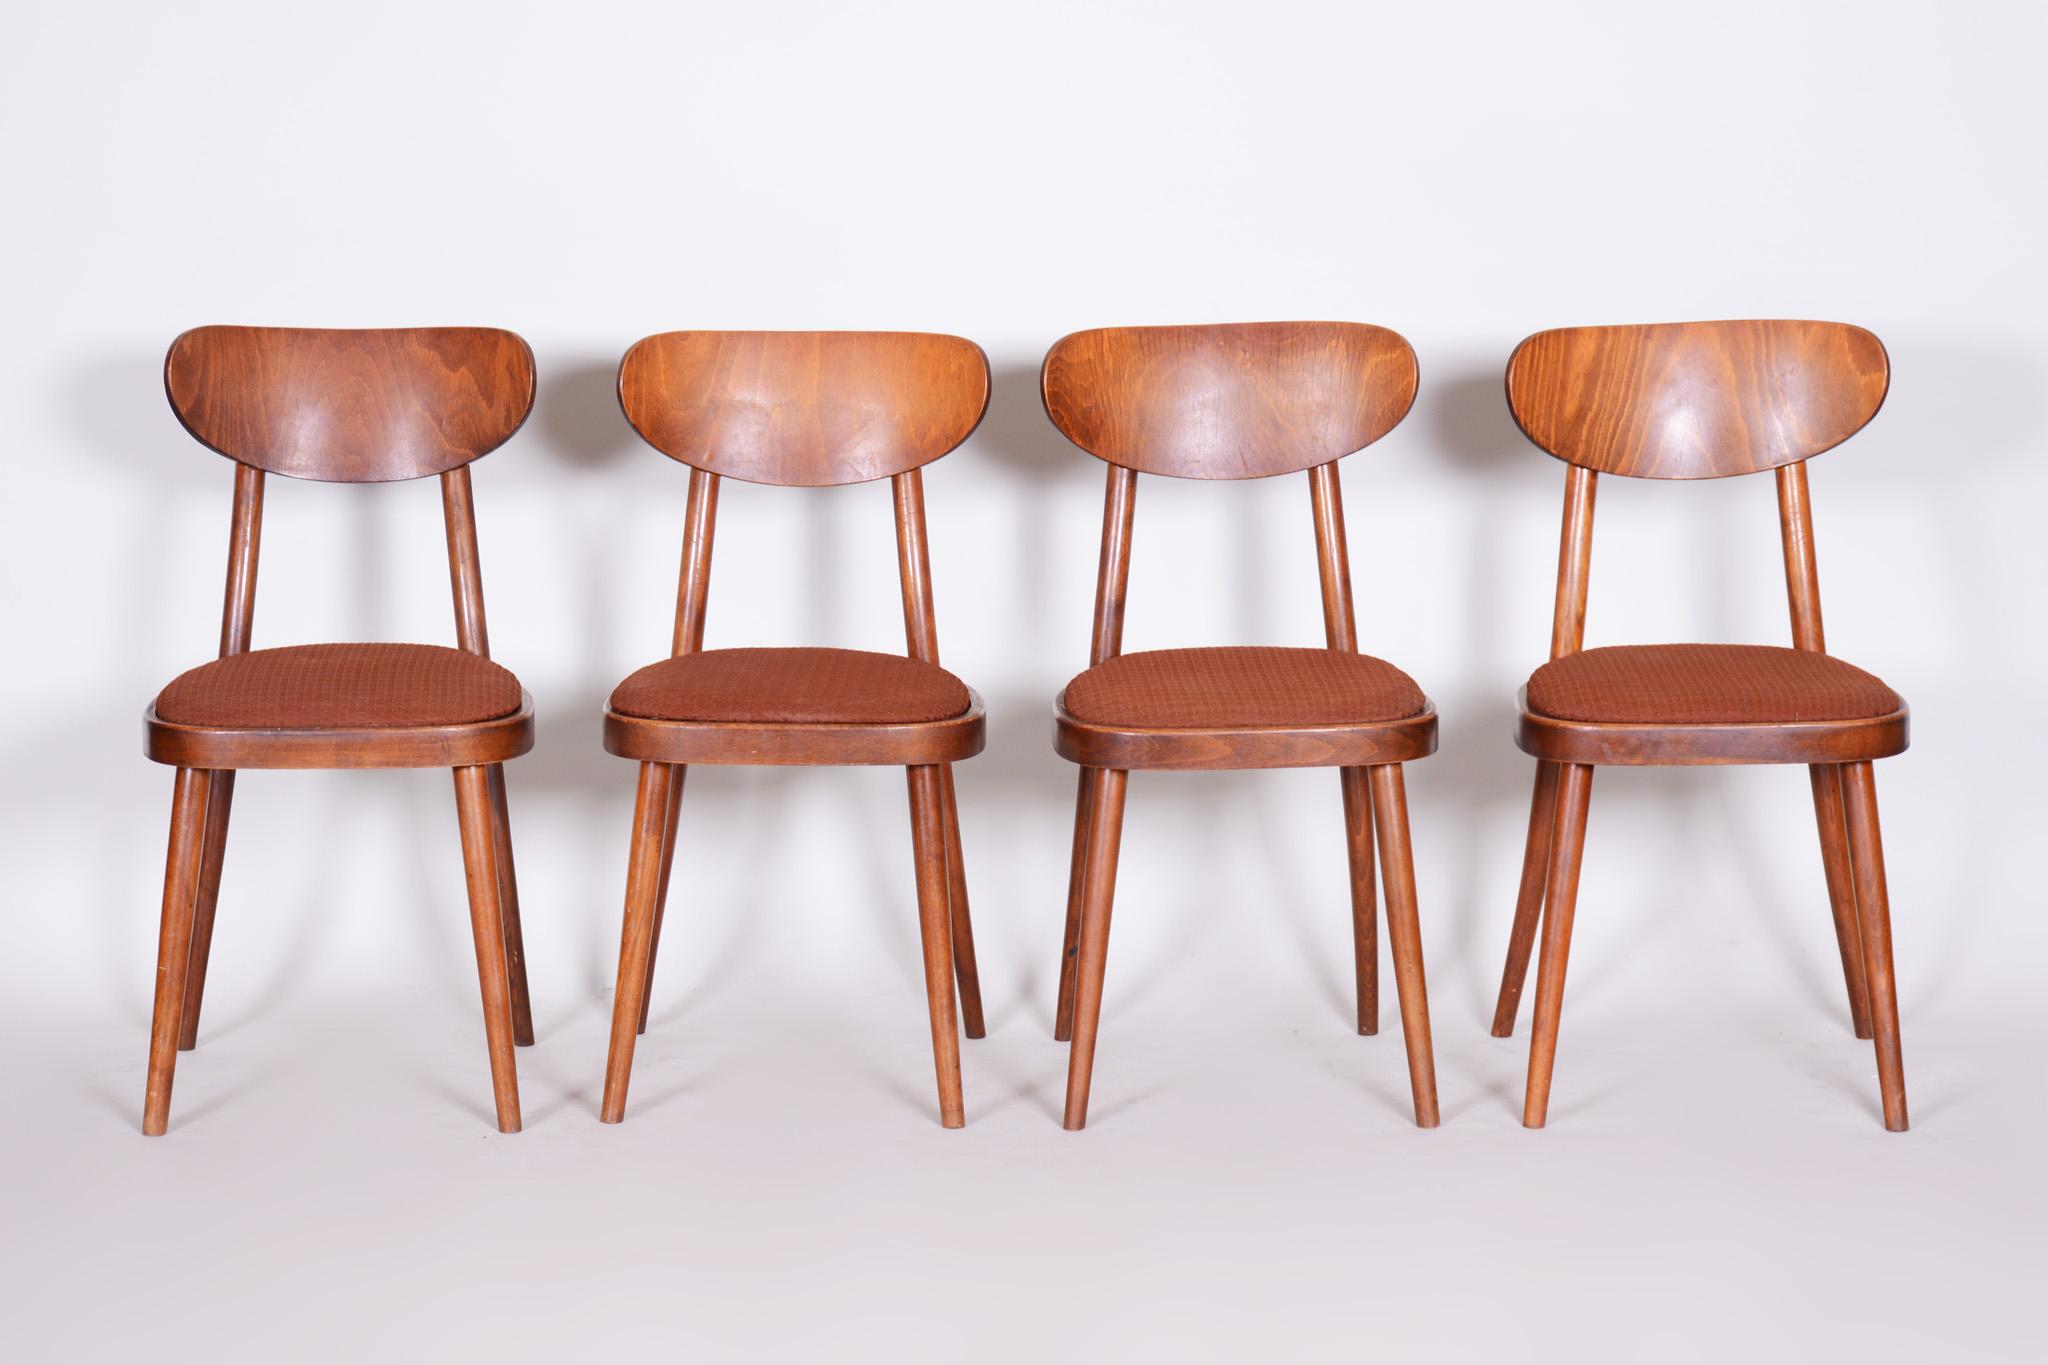 Czech midcentury chairs, four pieces.
Material: Beech
Period: 1940-1949
Original preserved condition.





   